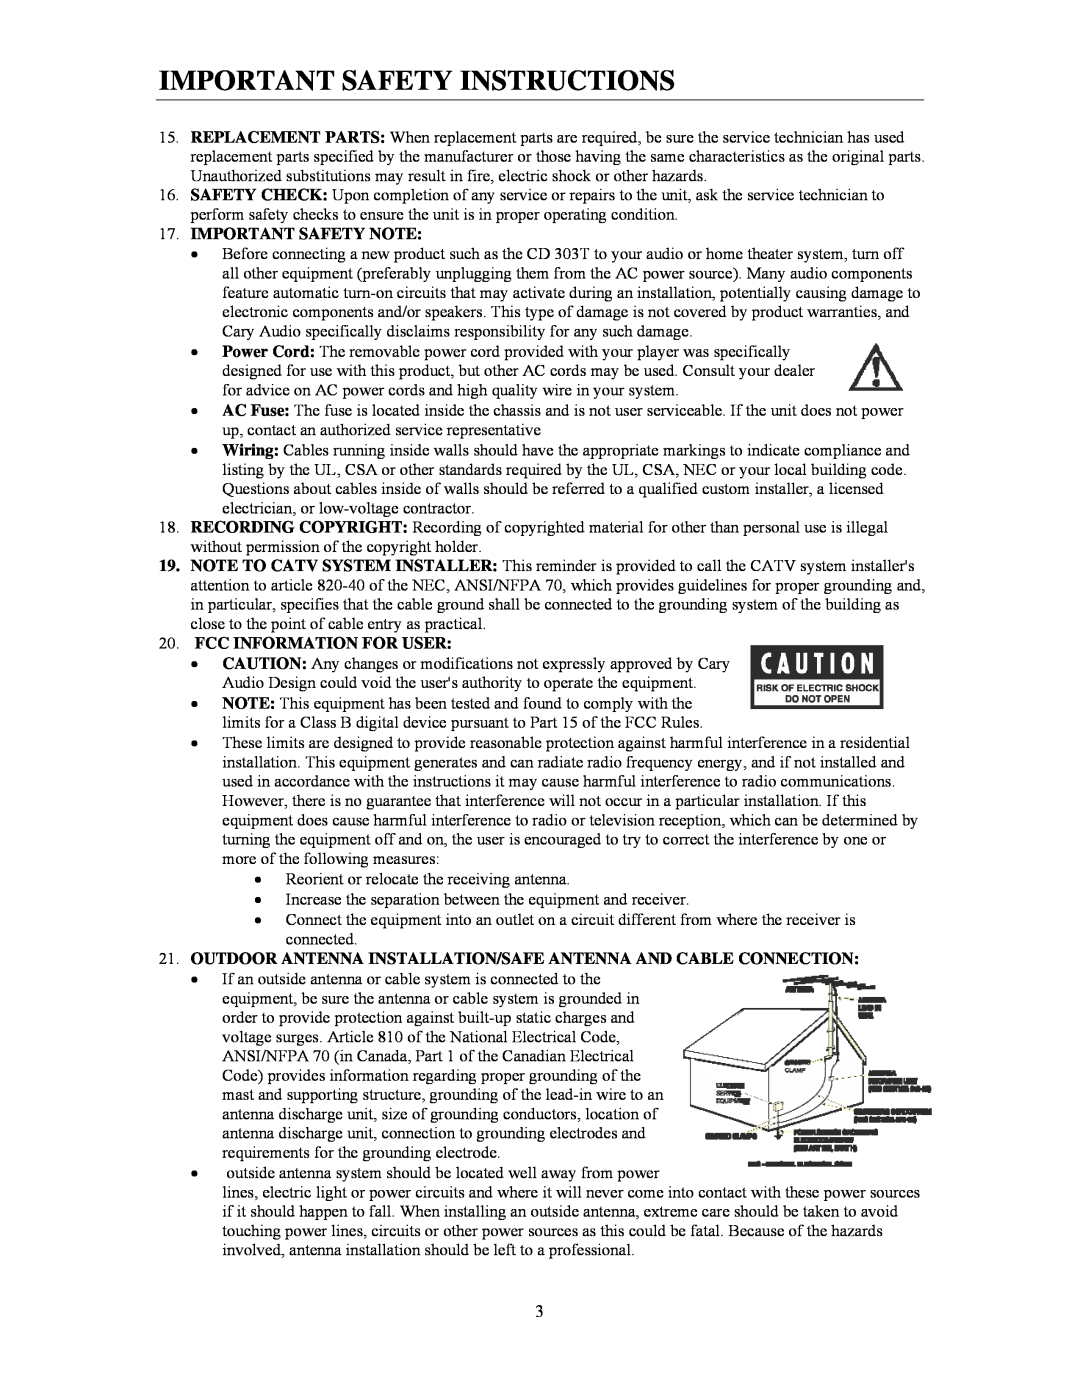 Cary Audio Design CD 303T SACD Important Safety Instructions, Important Safety Note, Fcc Information For User 